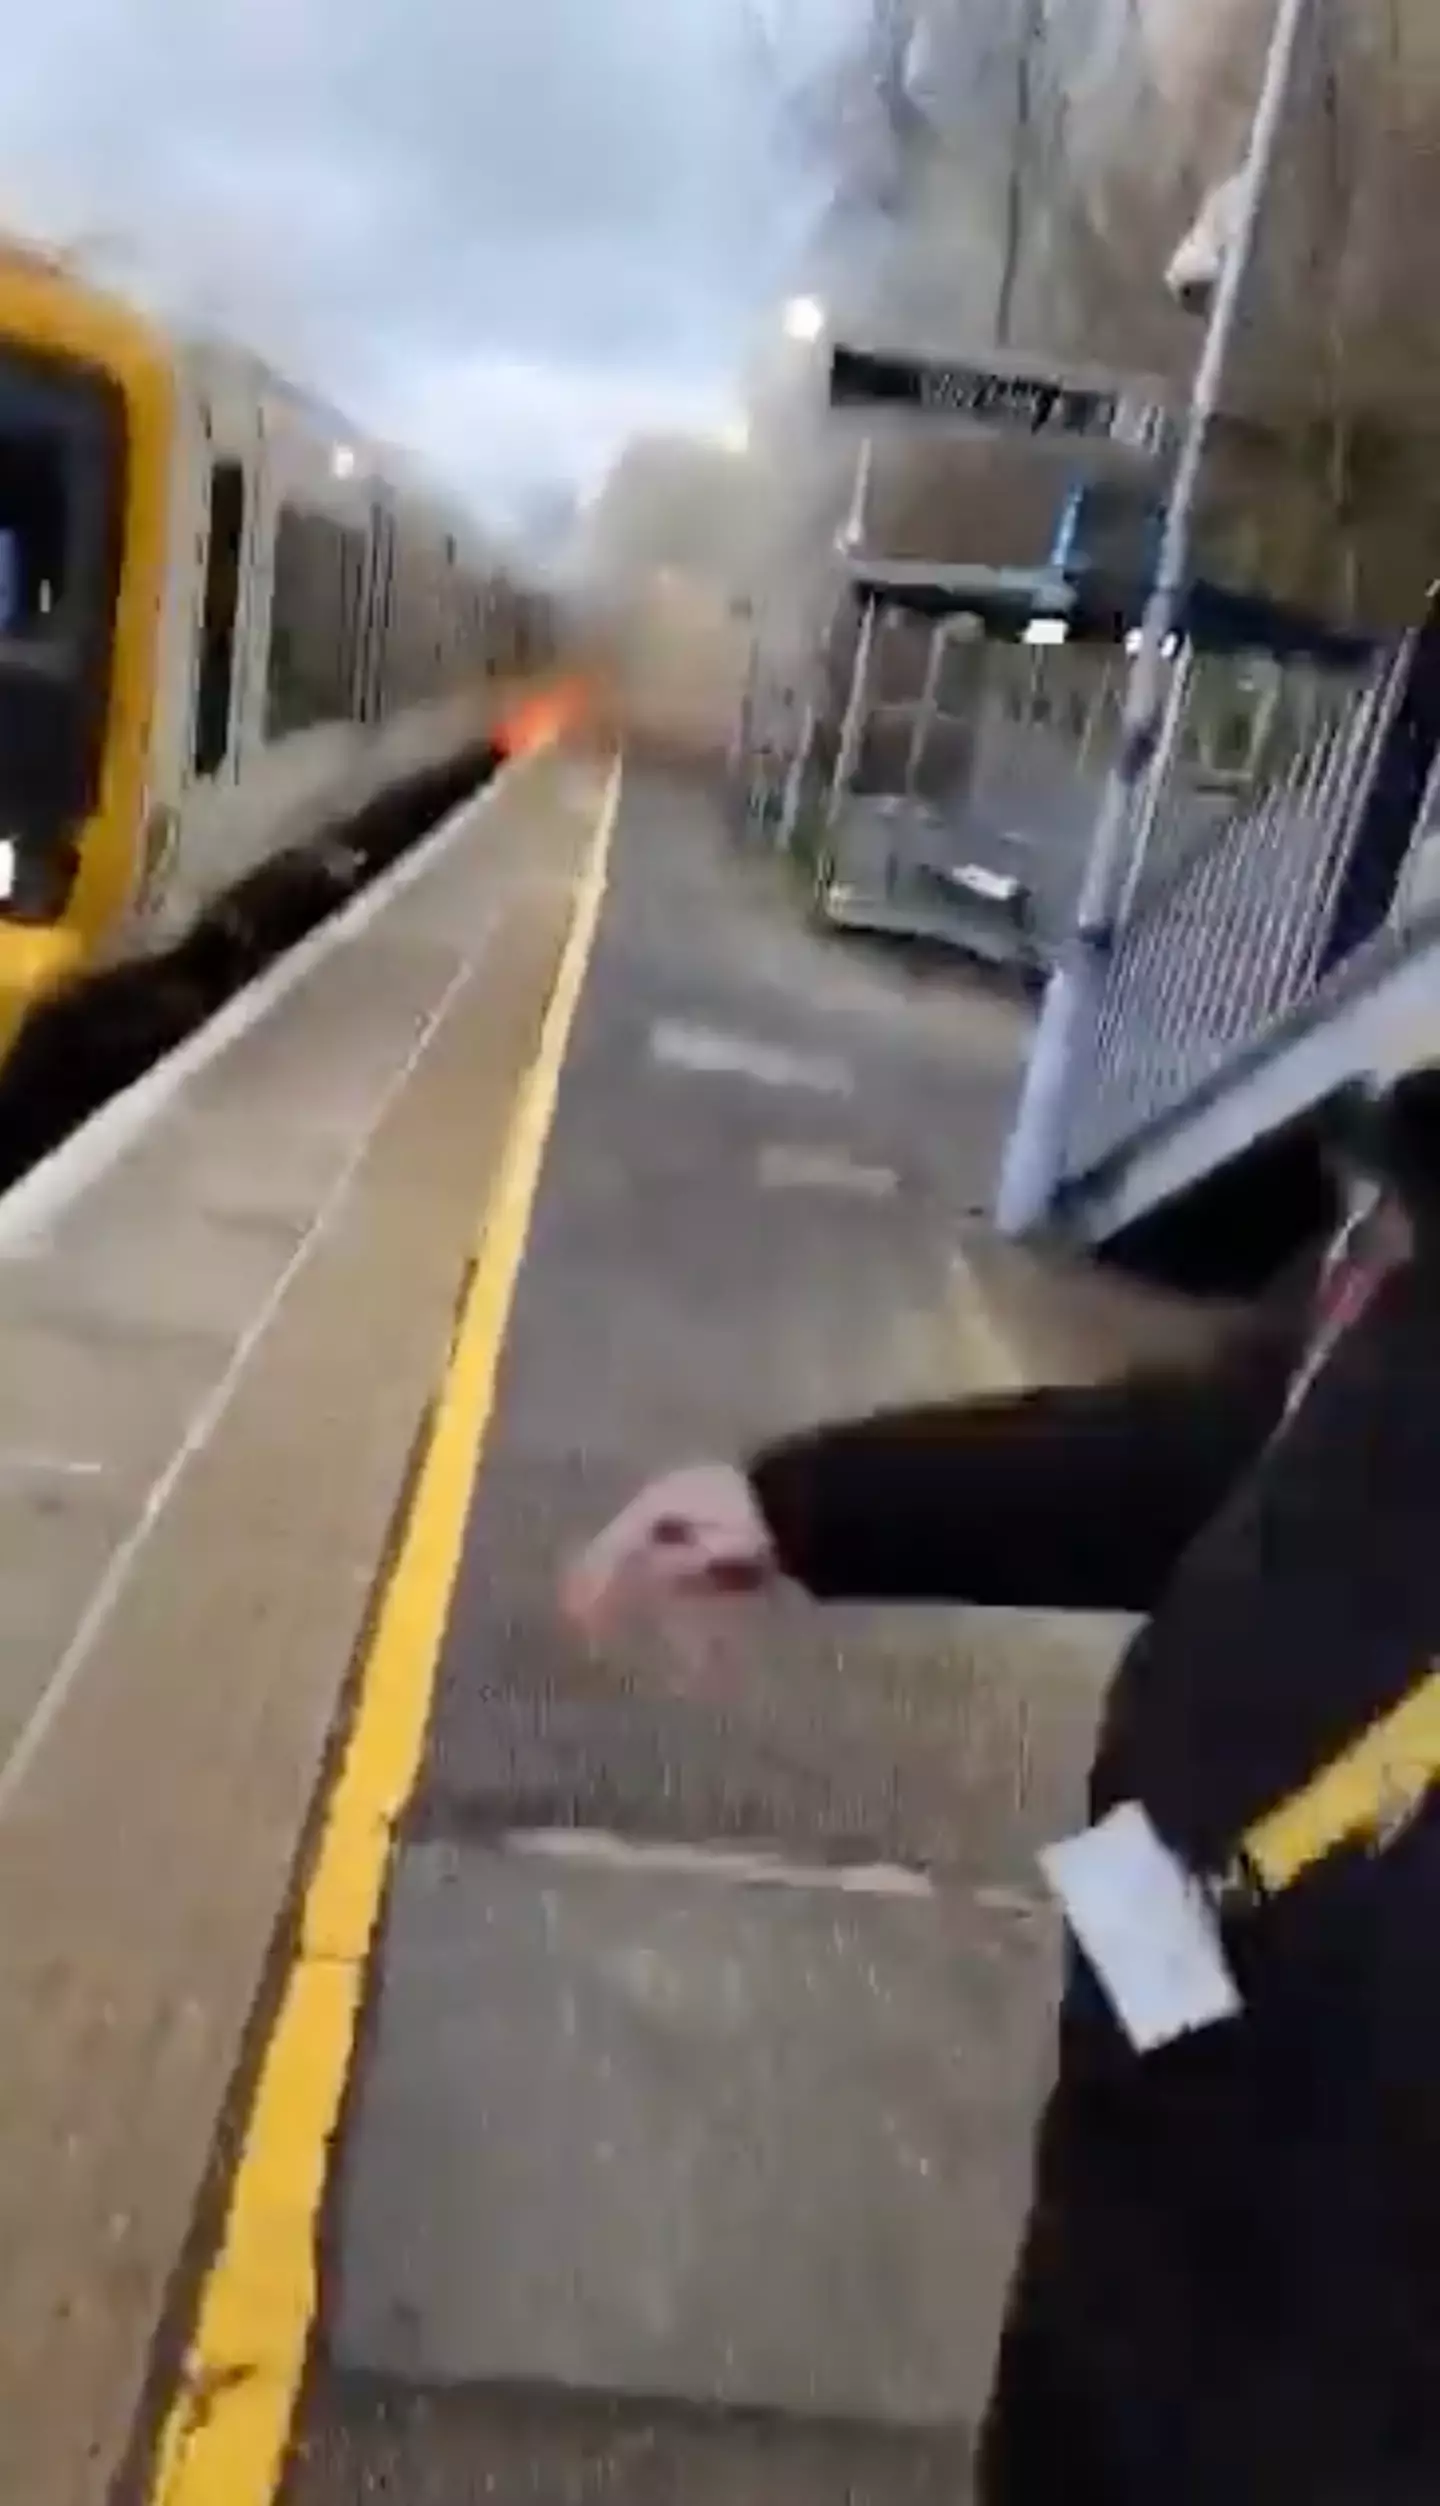 The train pulled into the platform on fire.